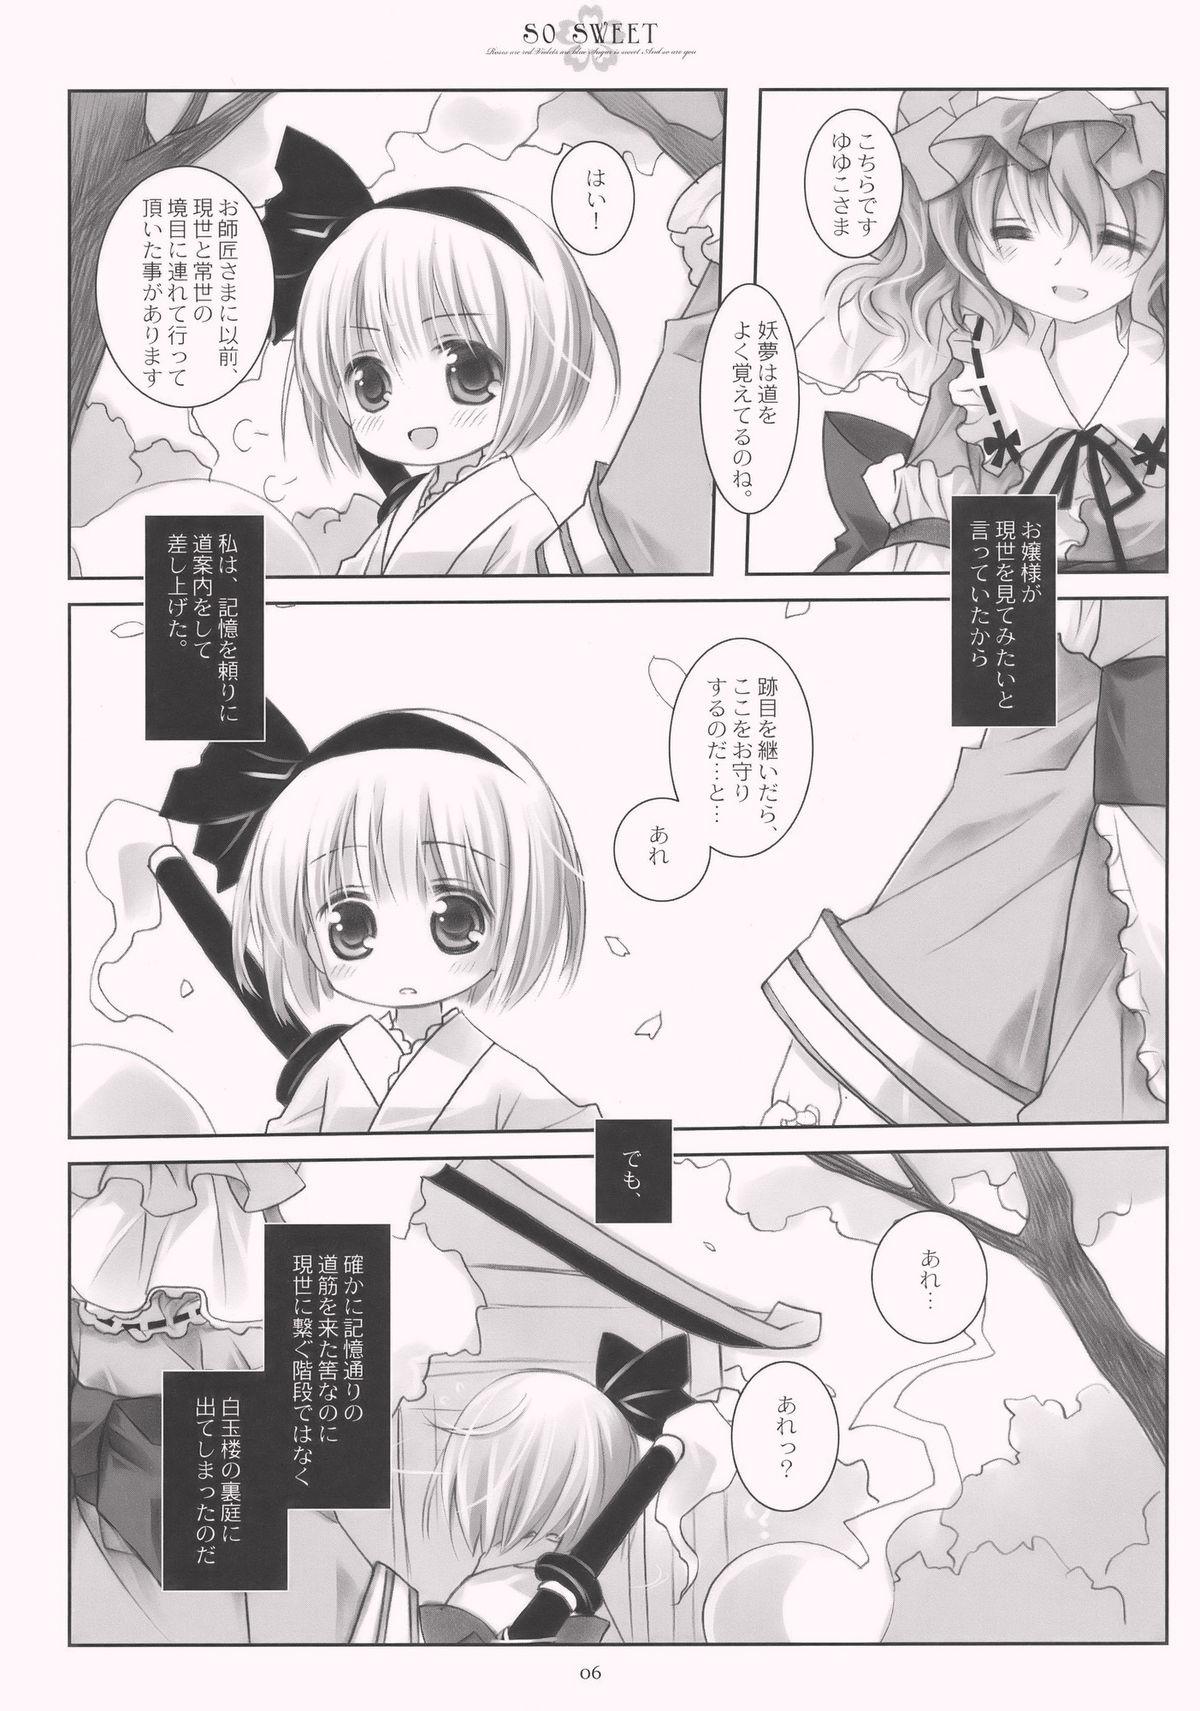 Hot SO SWEET - Touhou project Rebolando - Page 6